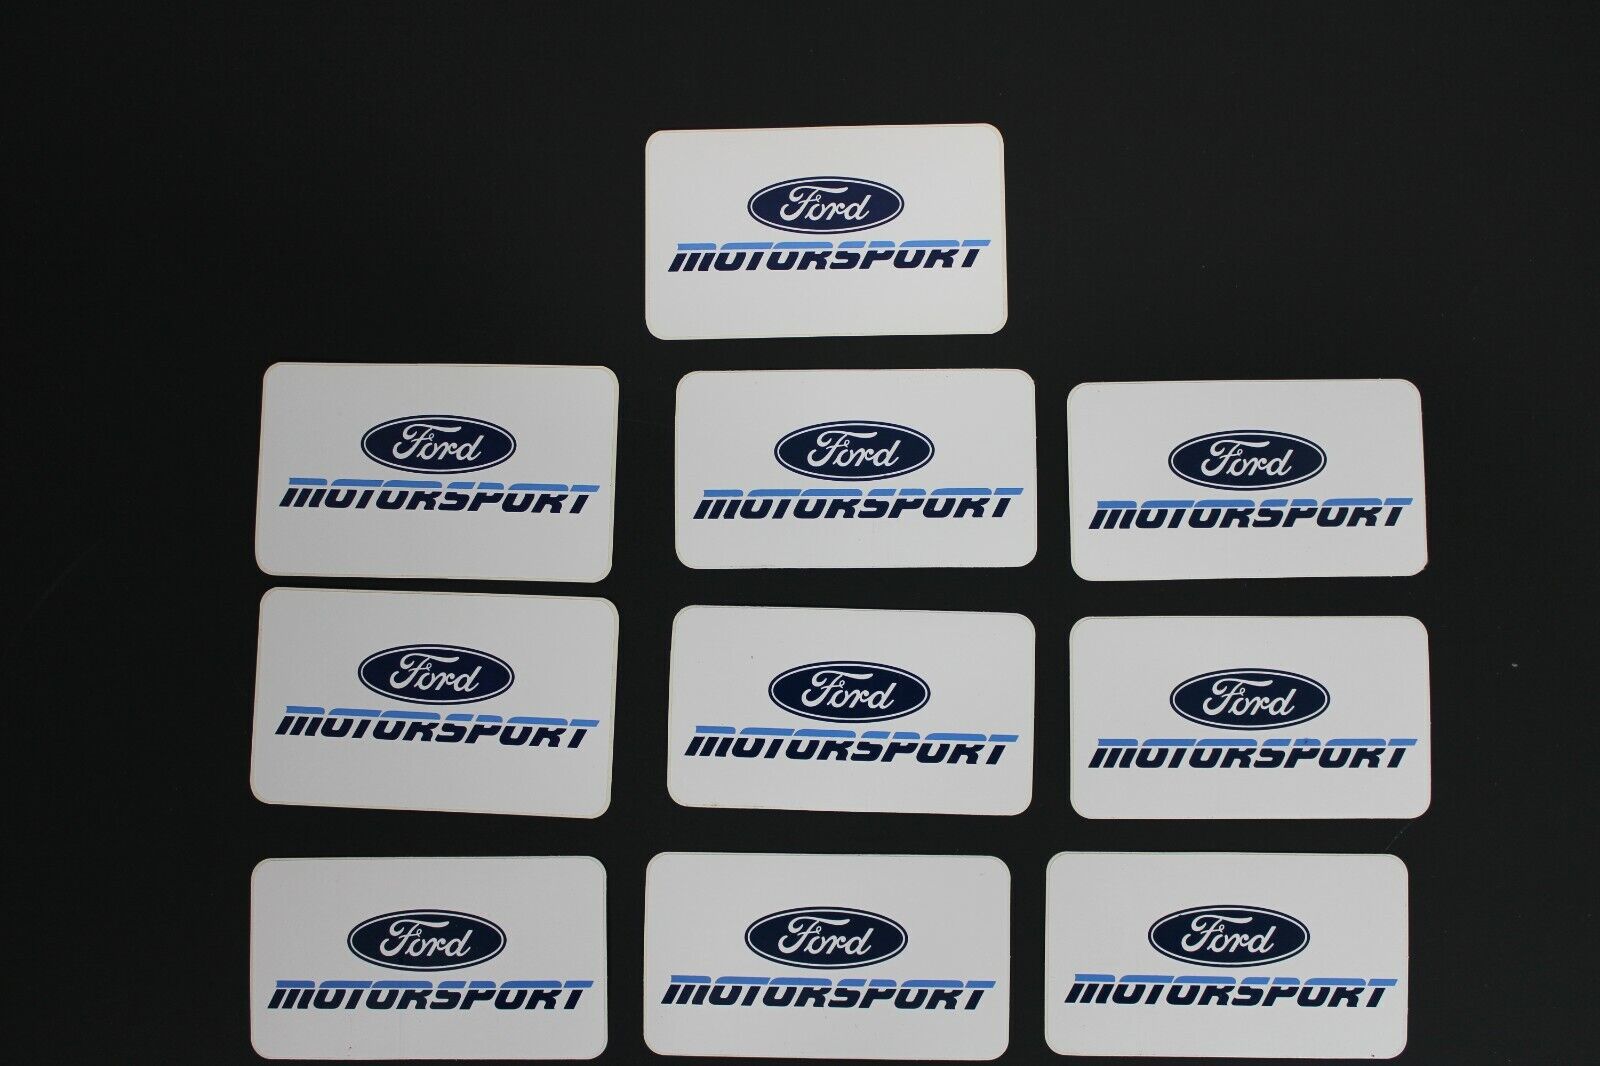 10 Original FORD Motorsport  decal sticker Small  Size 4x2 NOS  